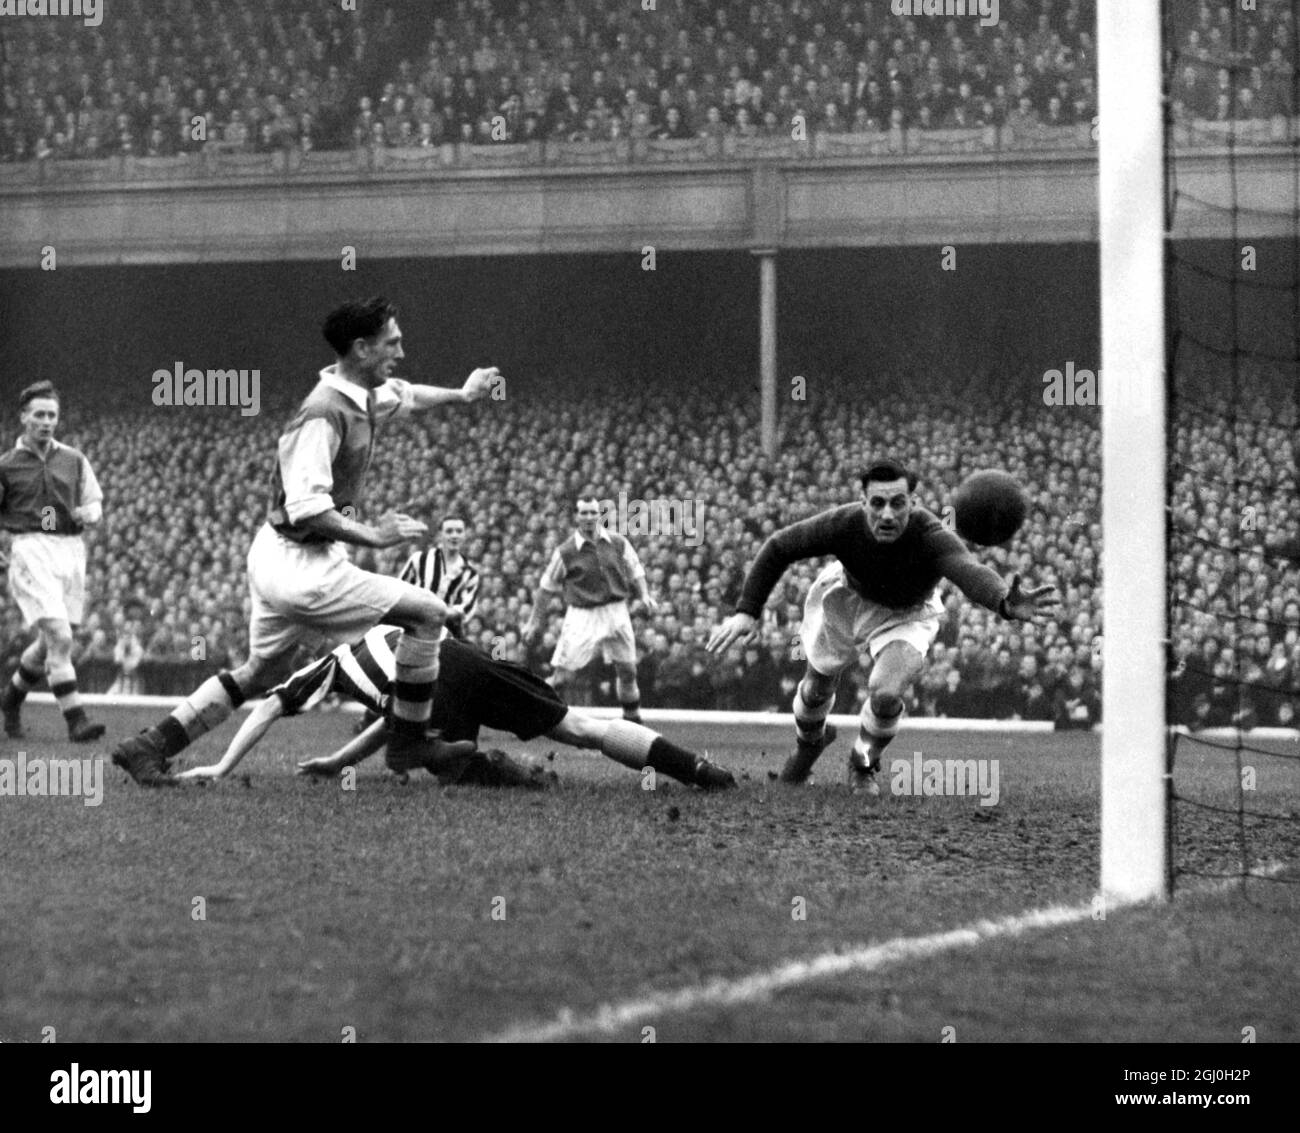 The goal scored by Newcastle to beat the Arsenal at Highbury Stadium. Hair, the Newcastle outside left (seen in background striped shirt) kicked for goal, but it was diverted by Milburn (on ground) to Mercer's shin from which it cannoned into the net despite a great effort by Swindin. The other two players in the picture are Macar (extreme left) and Barnes (in background) - 20th November 1948 Stock Photo